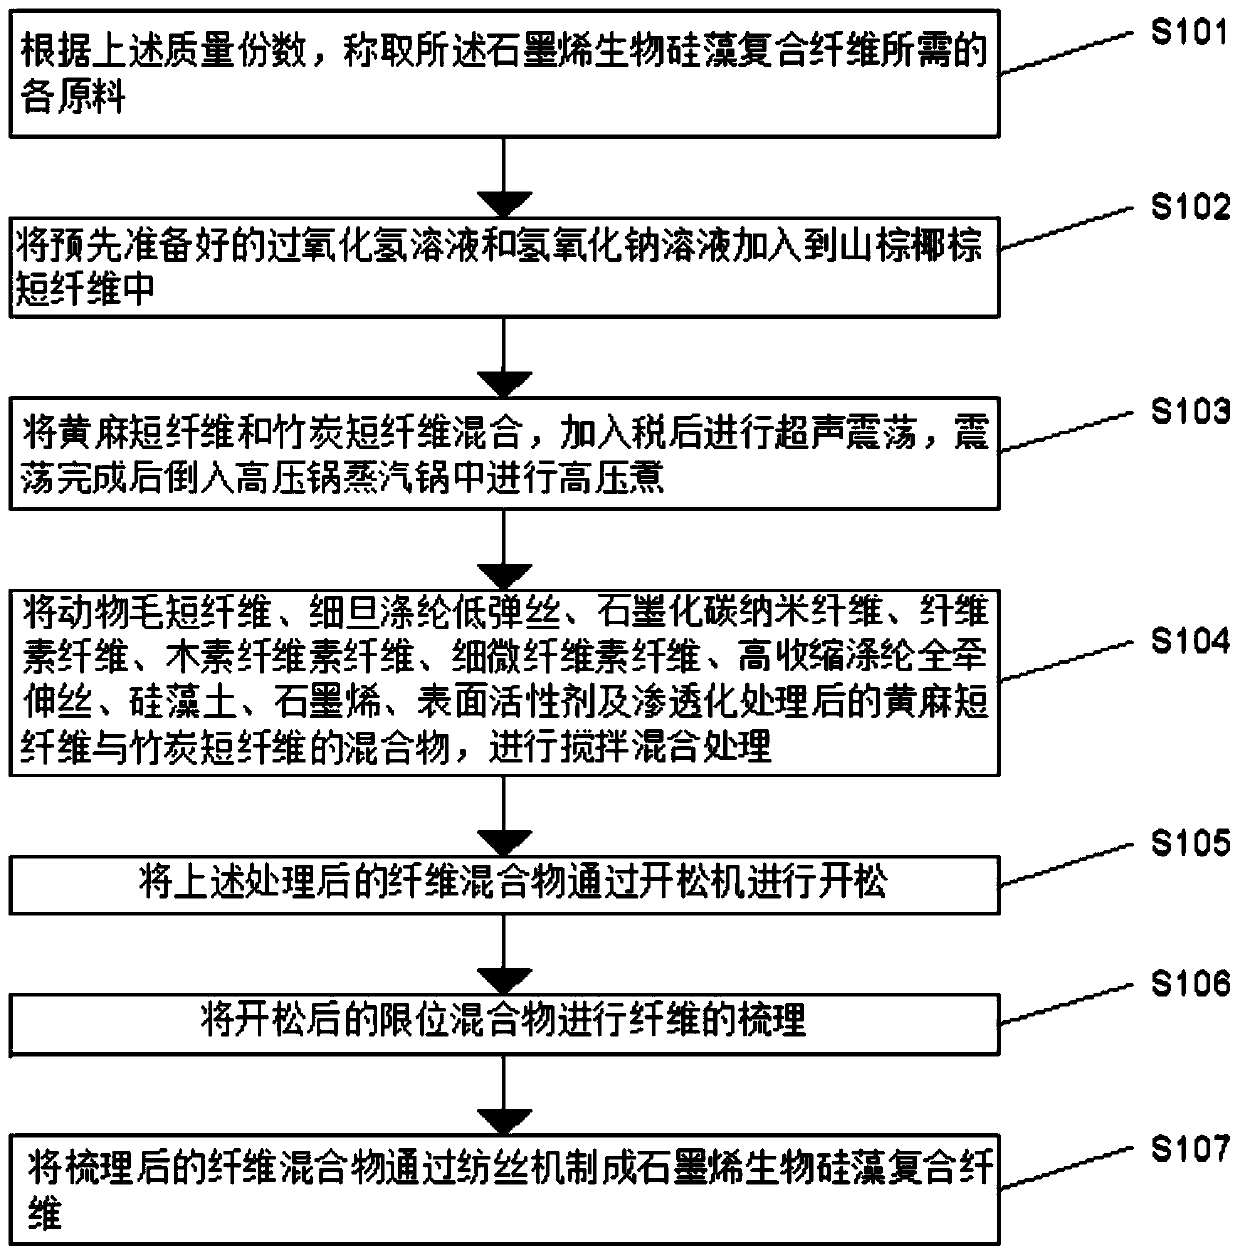 Graphene biological diatom composite fiber as well as preparation method and application thereof